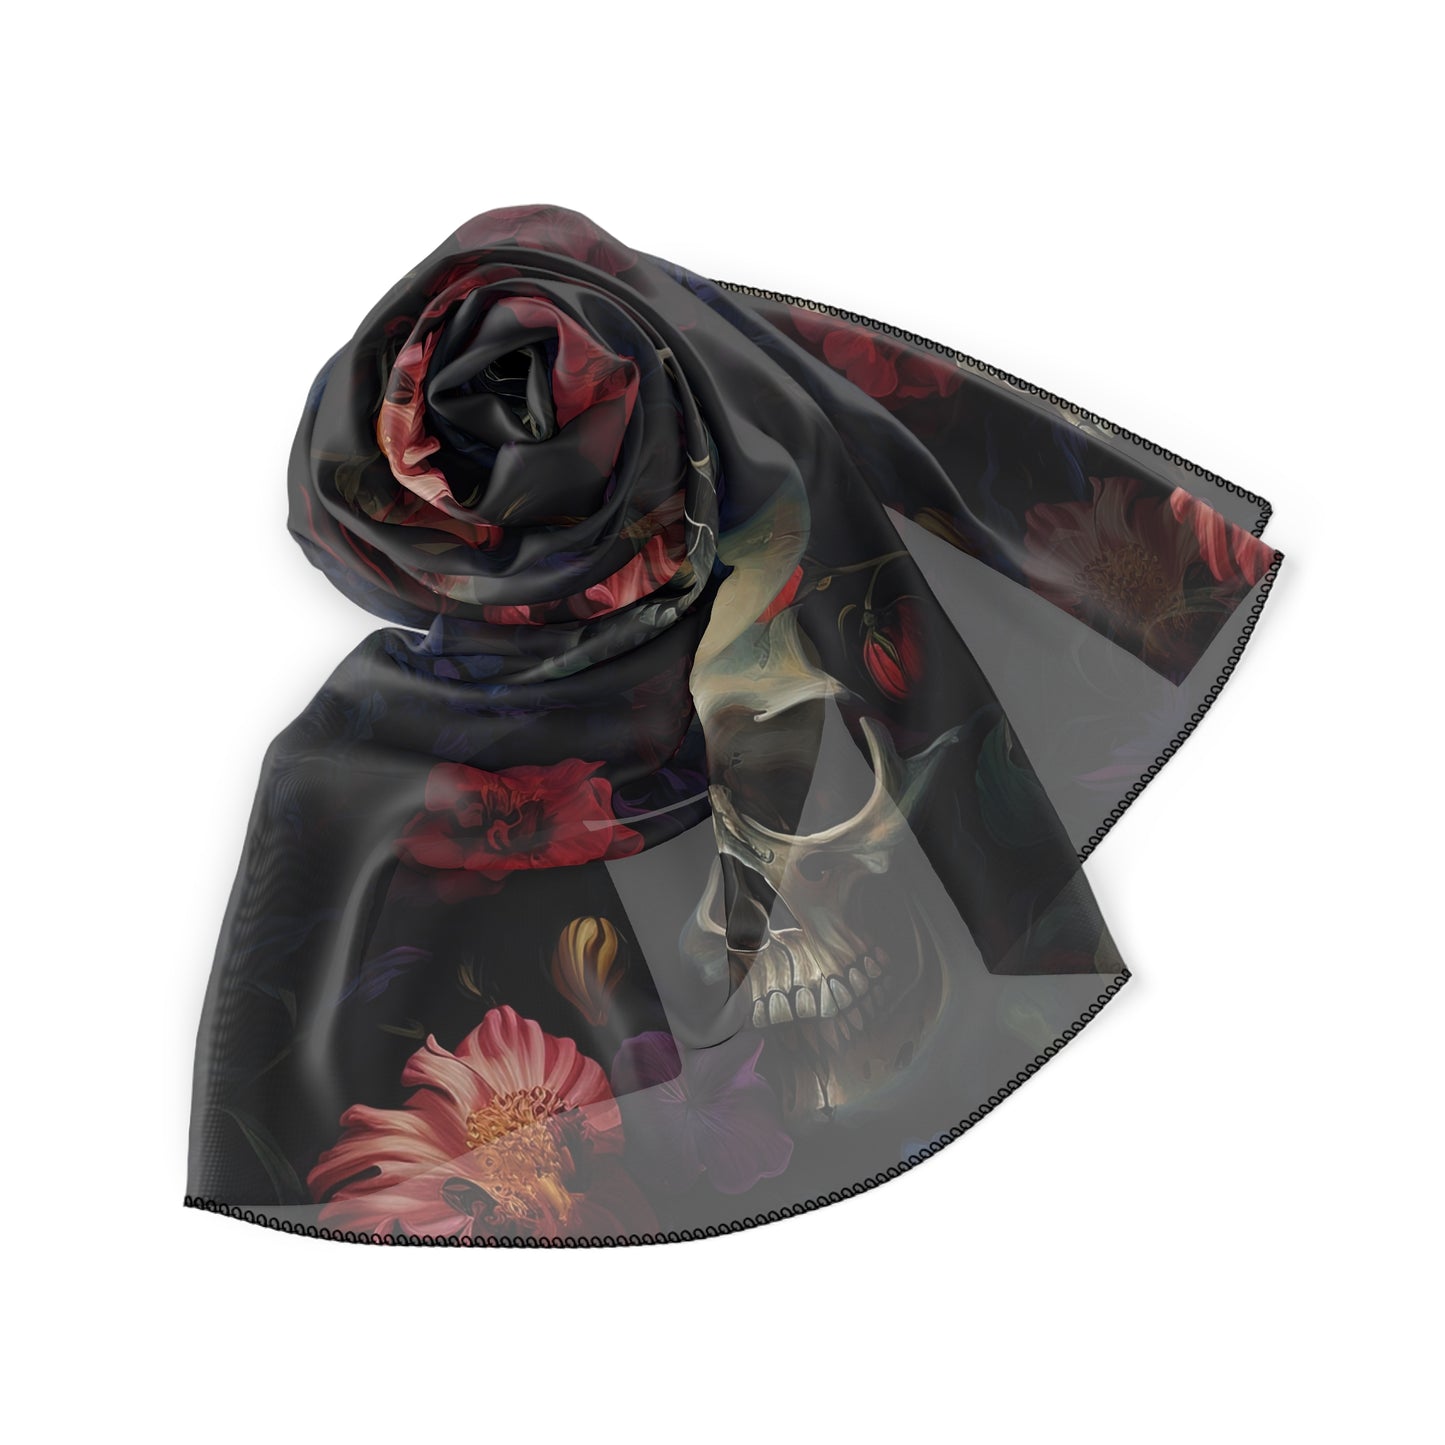 Large Skulls & Roses Gothic Witches Veil | Witchy Pagan Scarf